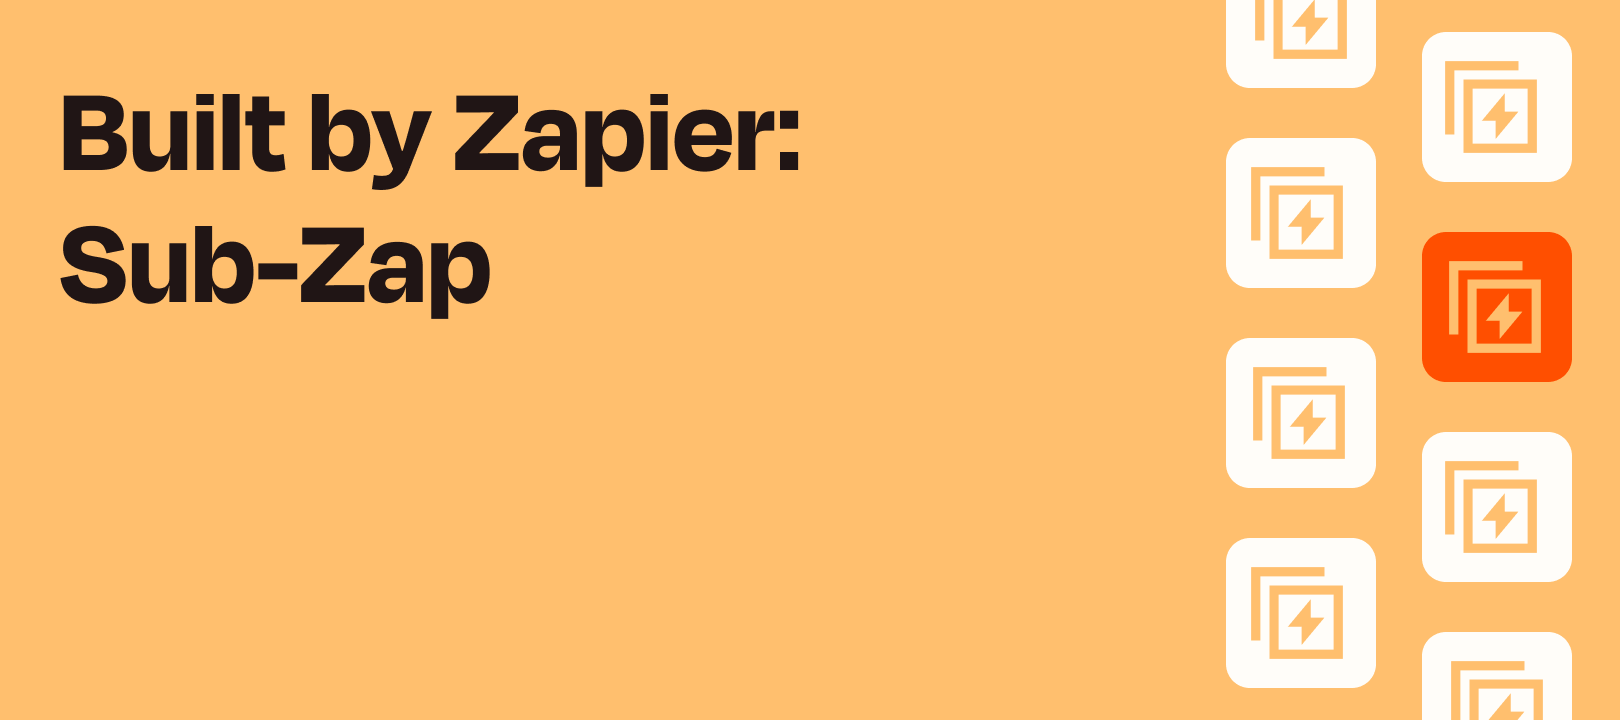 By Zapier: Sub-Zaps and how to use them